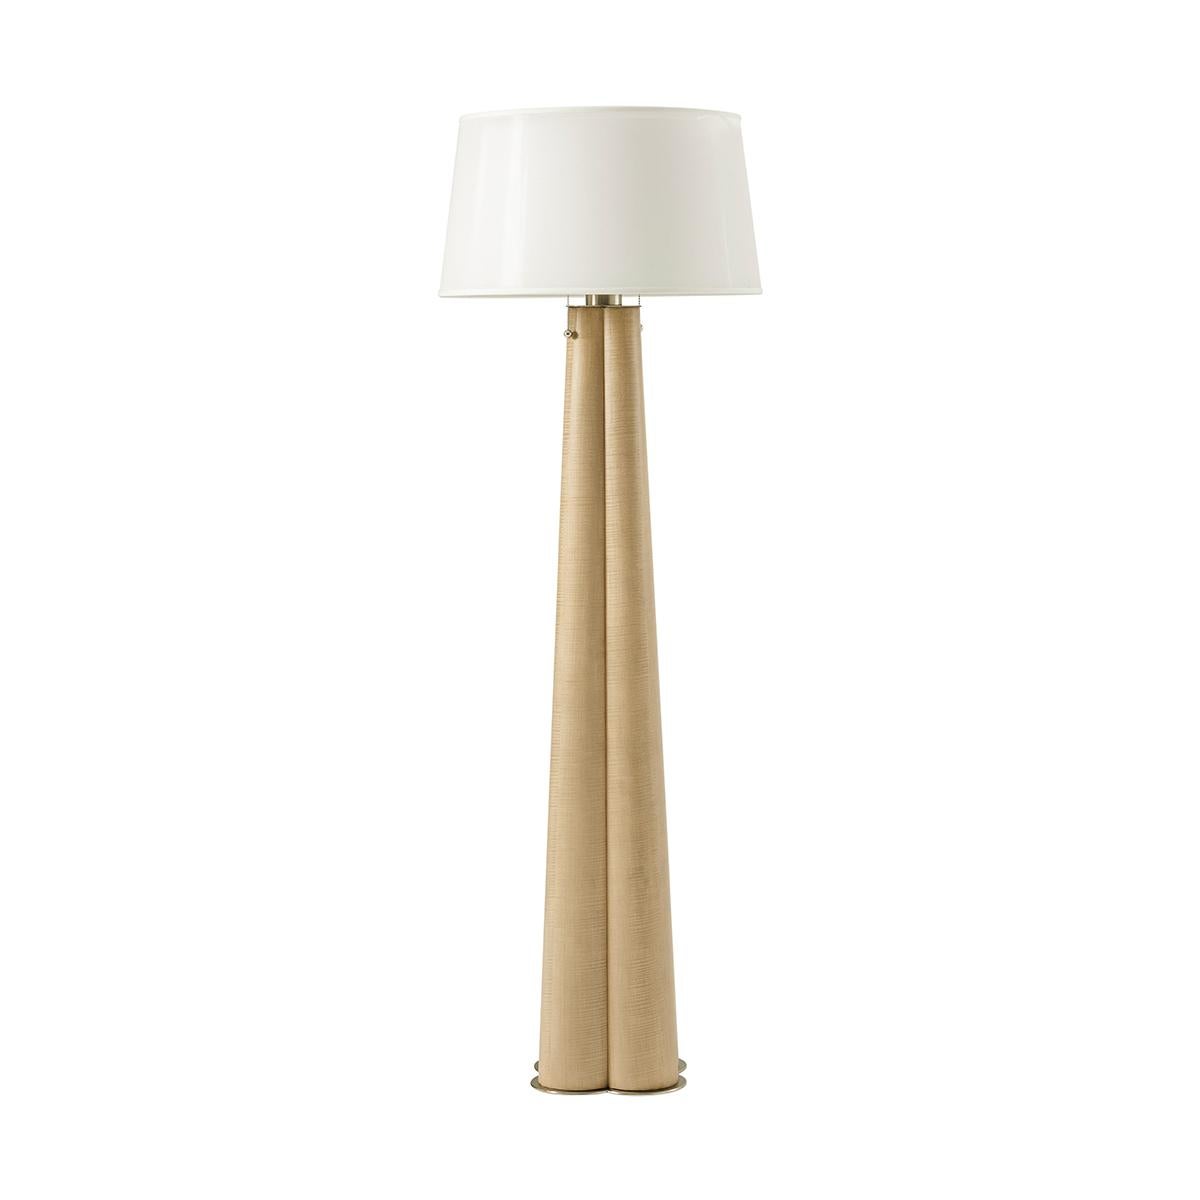 A beacon of 20th-century sophistication reimagined for the modern home. Inspired by the understated luxury of the 1920s, this floor lamp boasts a tapered cluster column form in a light sesame finish.

Whether it's enhancing a cozy corner or standing